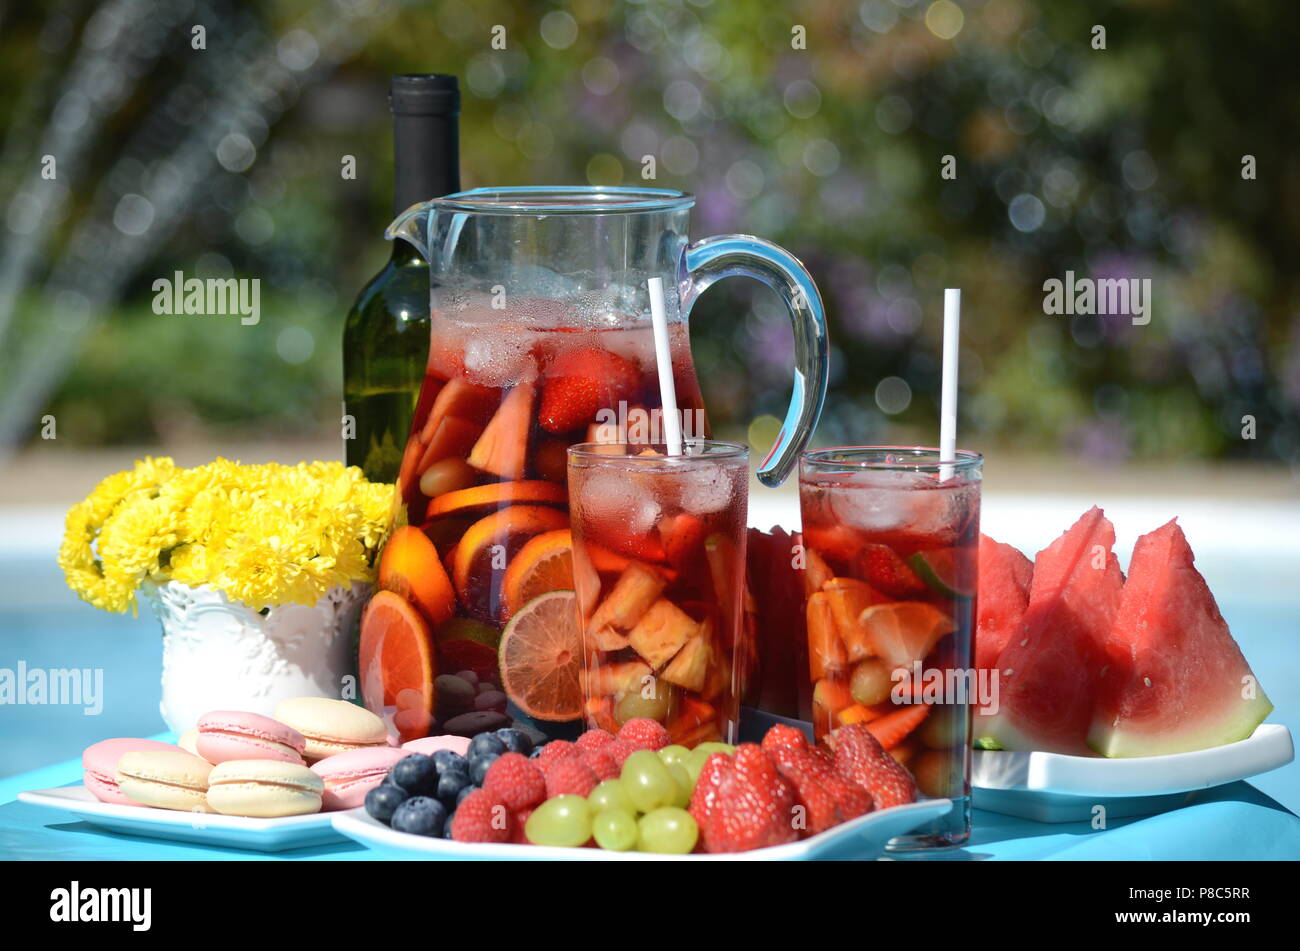 Pool party with sangria pitcher, fruit cocktails and refreshments